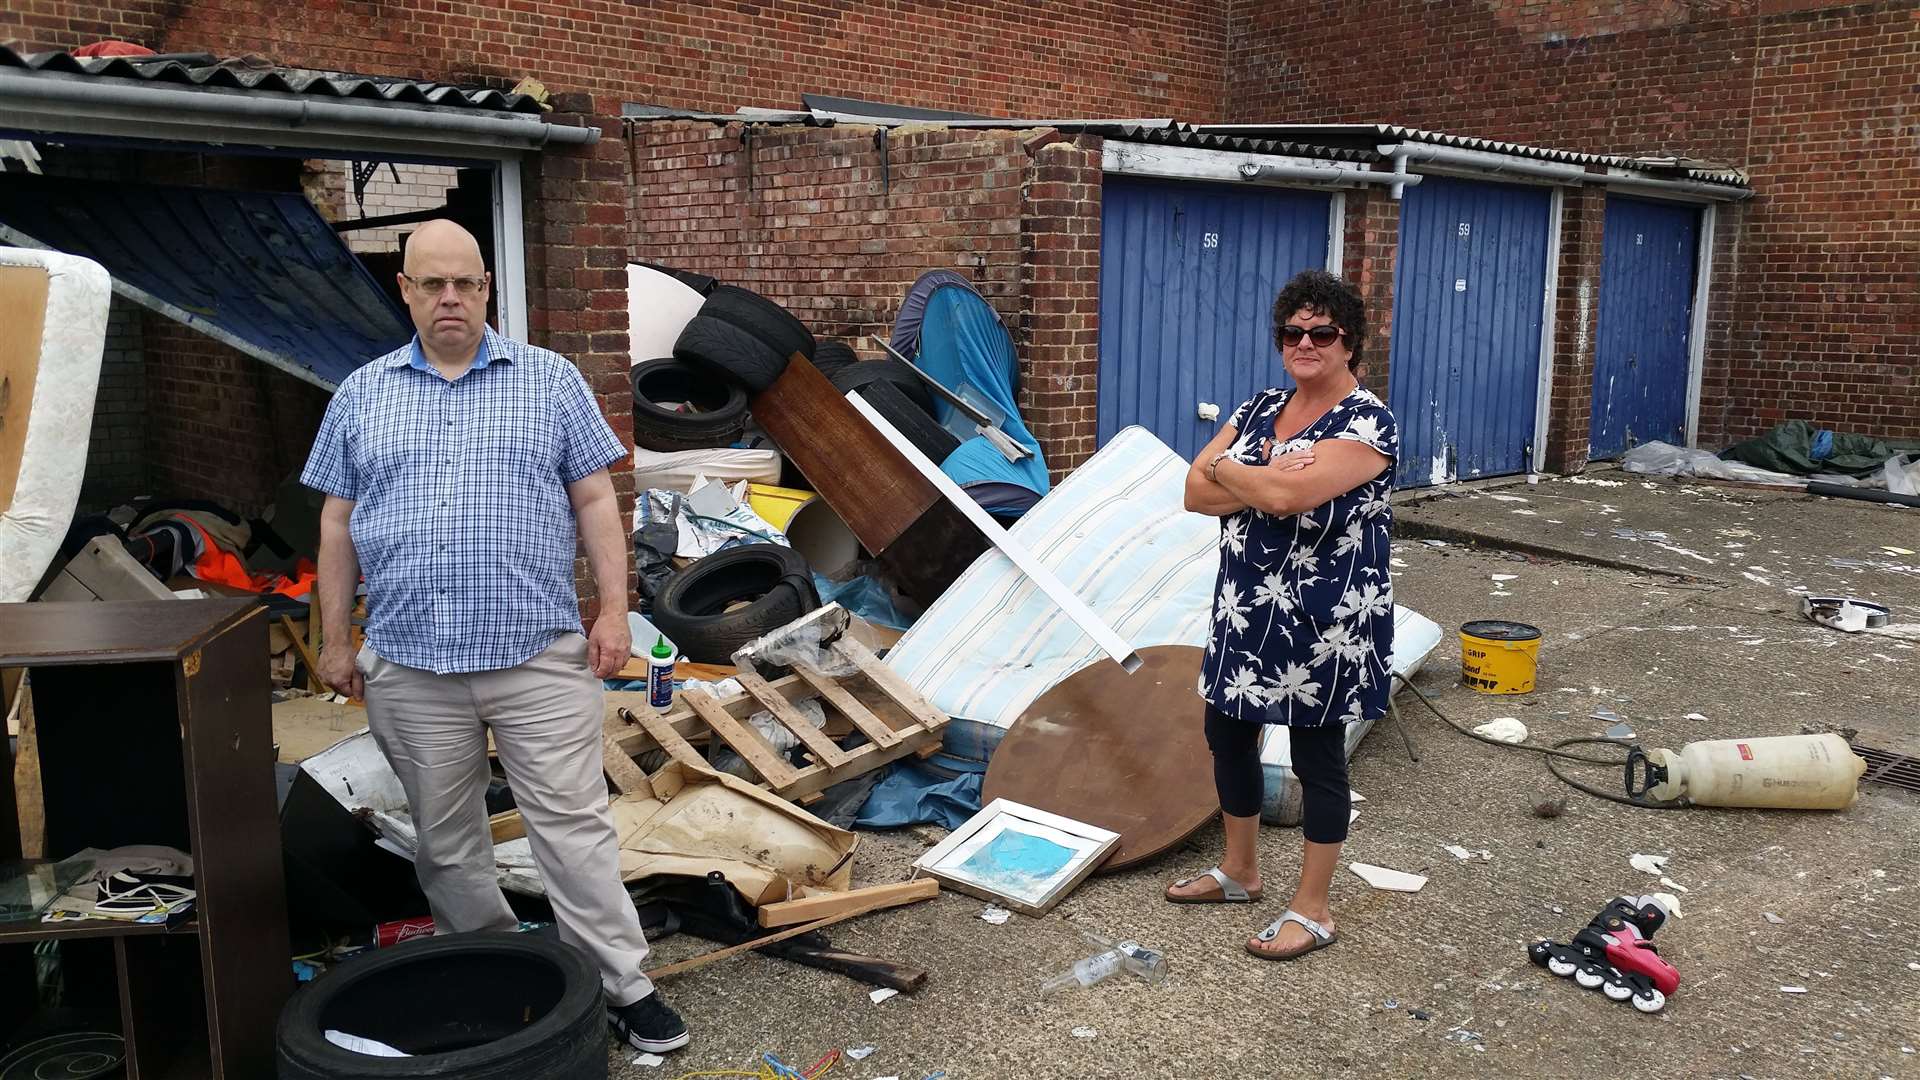 In July 2015, Teresa Murray and Nick Bowler were campaigning to get rubbish removed